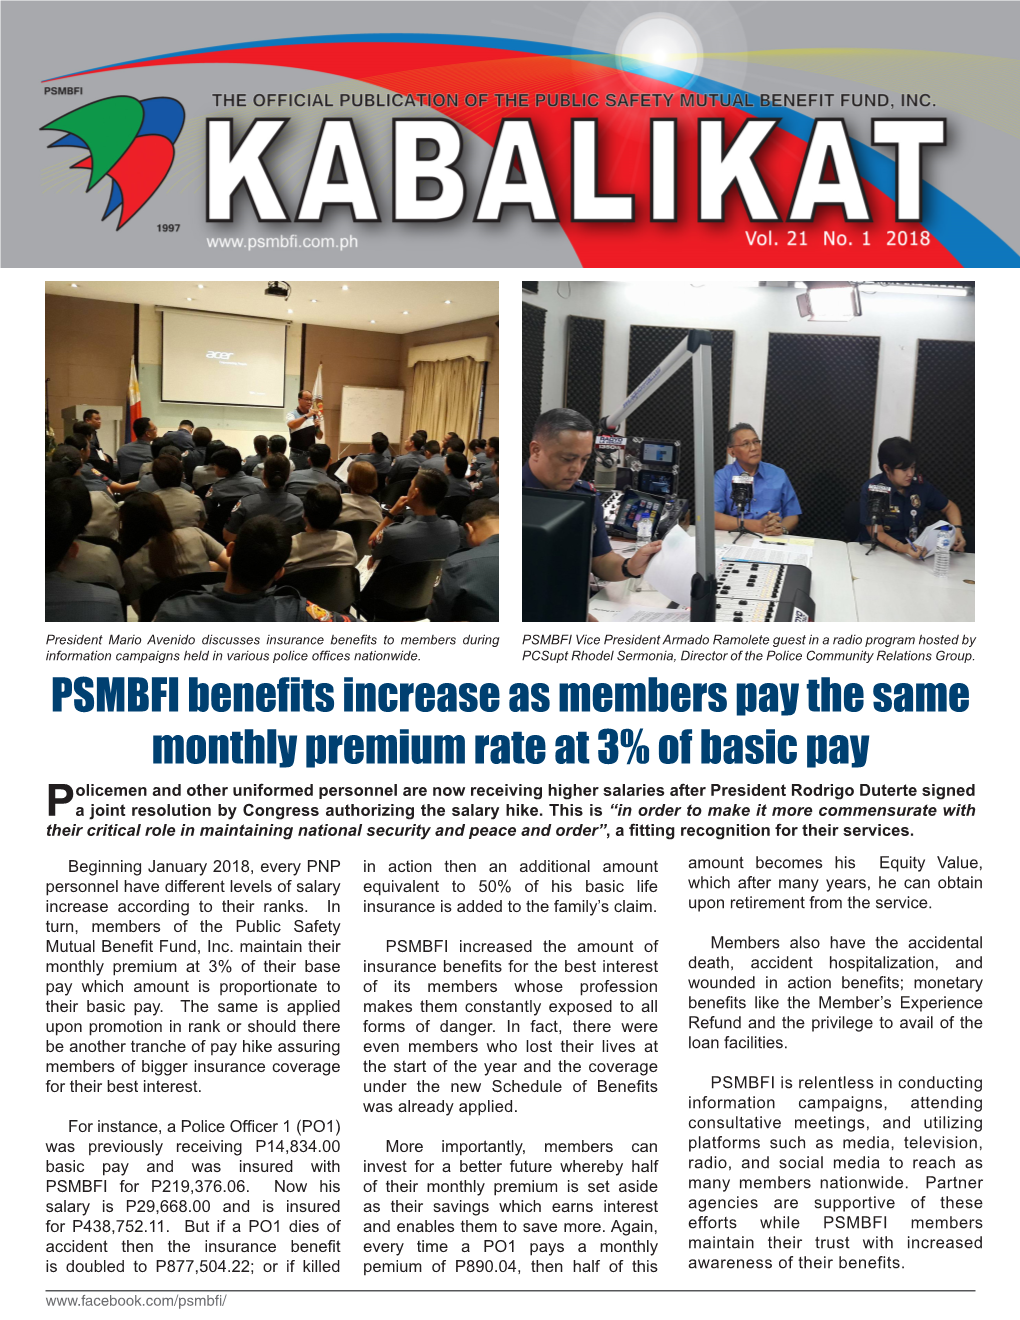 PSMBFI Benefits Increase As Members Pay the Same Monthly